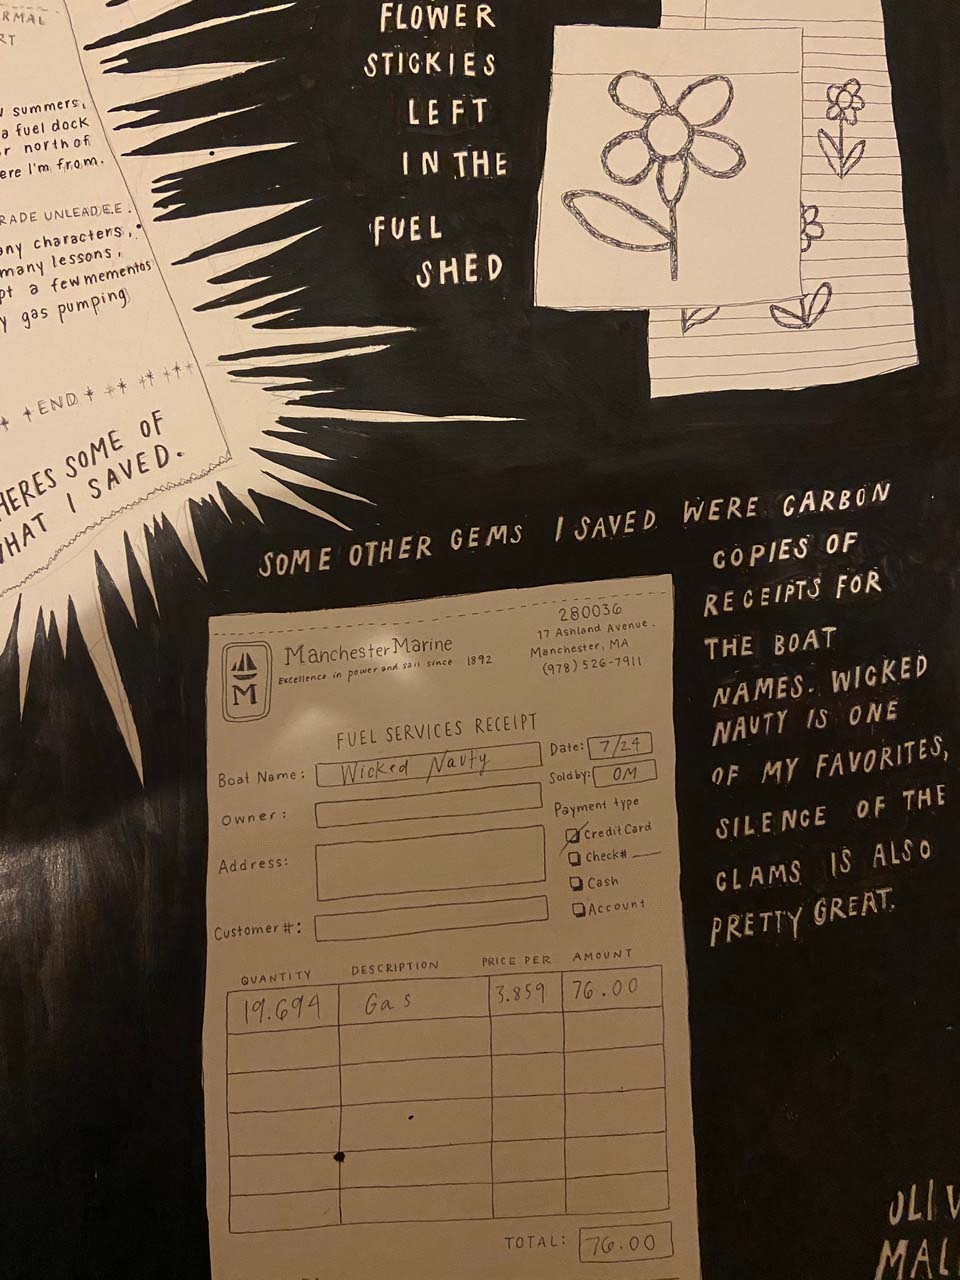 A close-up view of the artwork. Next to two illustrations of flowers drawn on paper is the handwritten caption: "Flower stickies left in the fuel shed." Below is an illustrated “fuel services” receipt next to the handwritten caption: "Some other gems I saved were carbon copies of receipts for the boat names. Wicked Nauty is one of my favorites, Silence of the Clams is also pretty great."